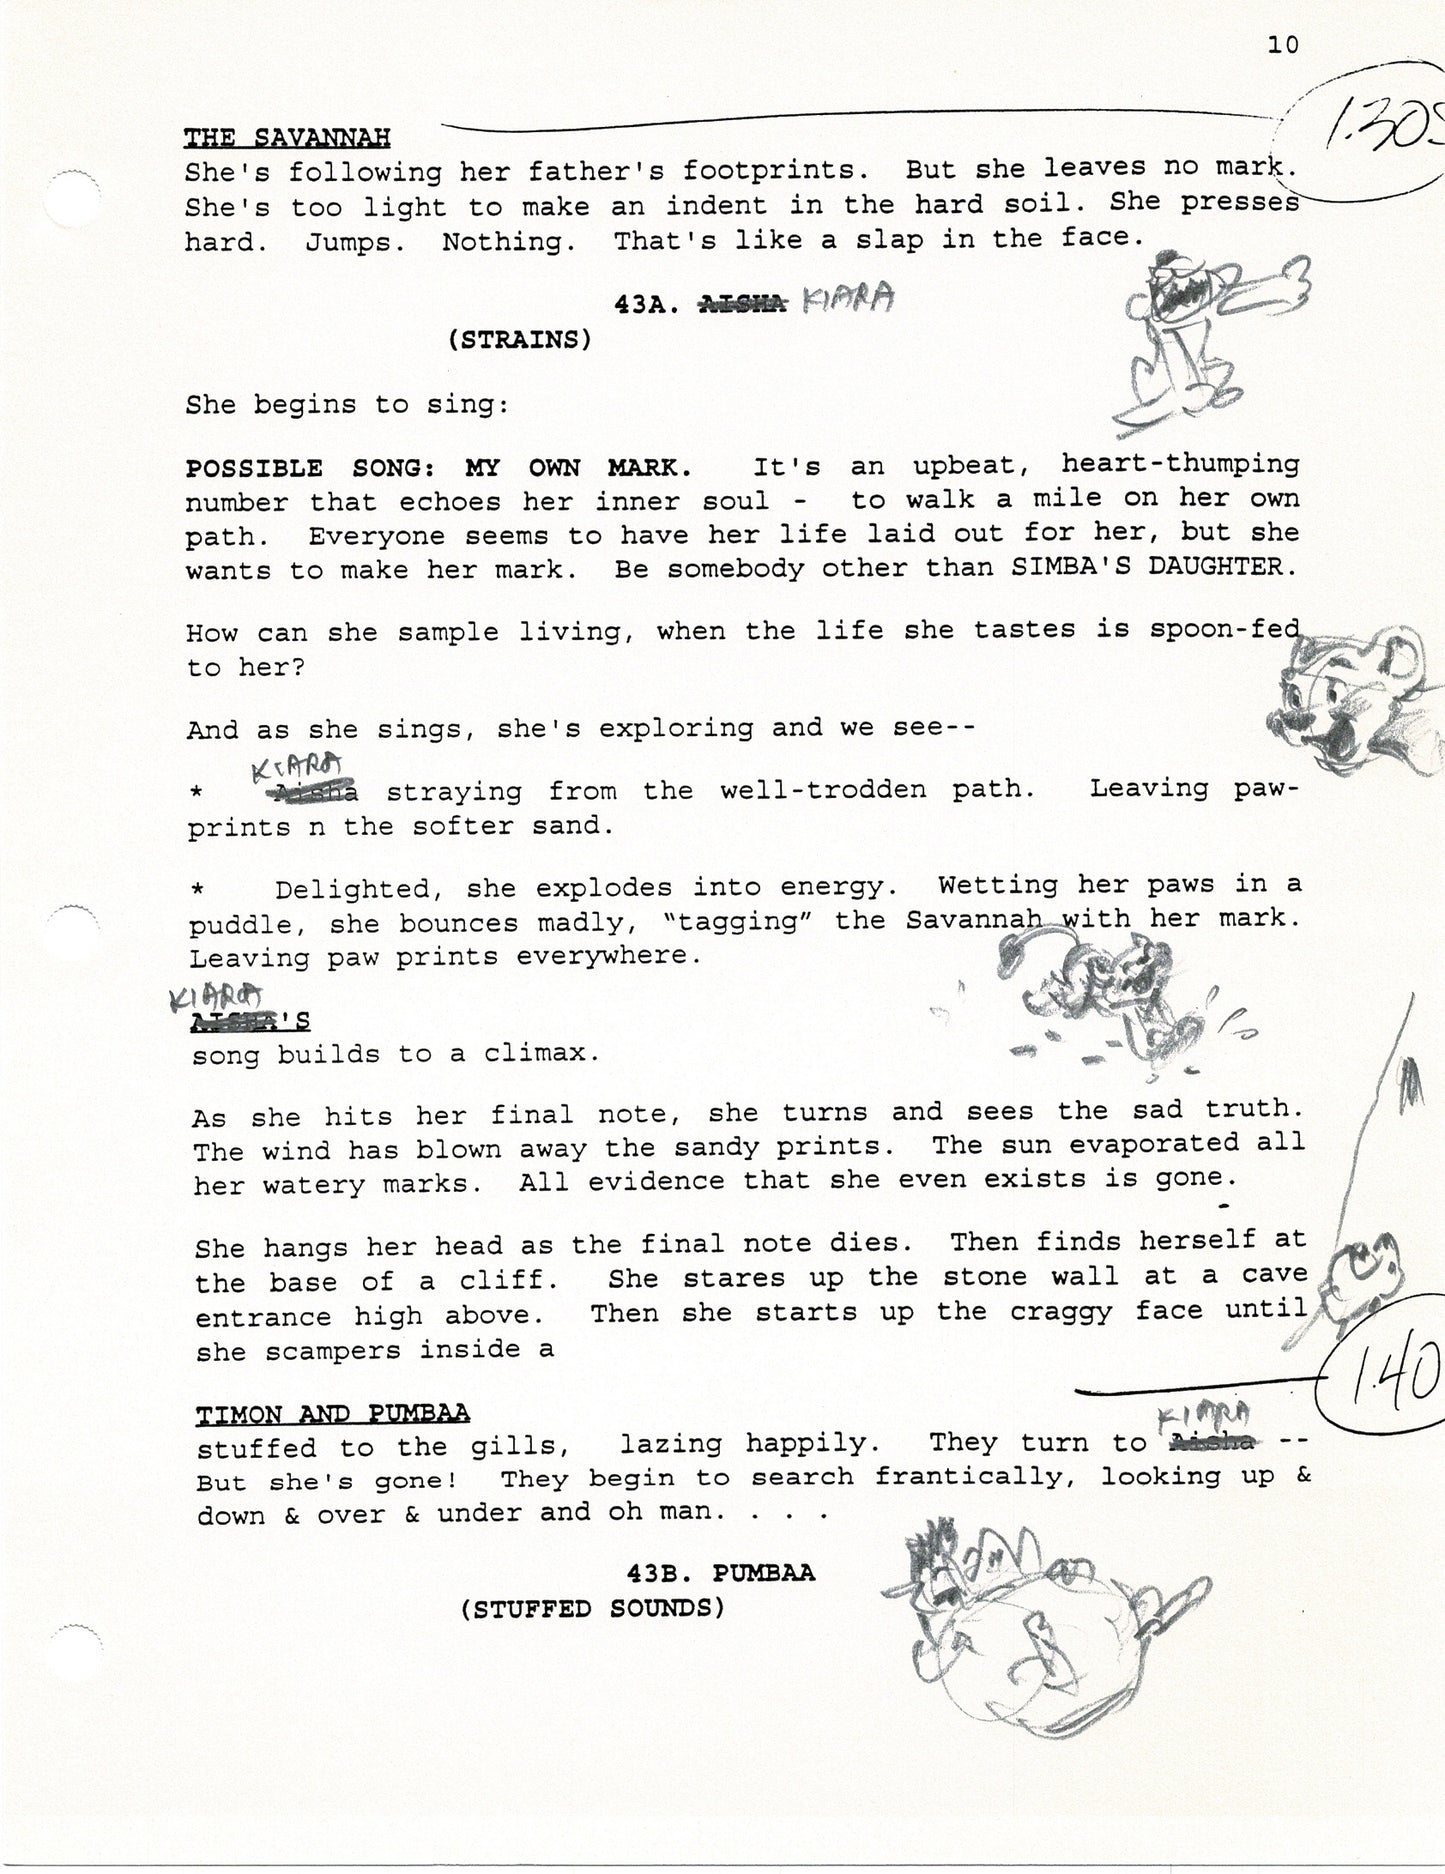 LION KING II Simba's Pride Disney Production Copy Script with 50 Pages of Sketches from the Wendell Washer's Estate 11-8